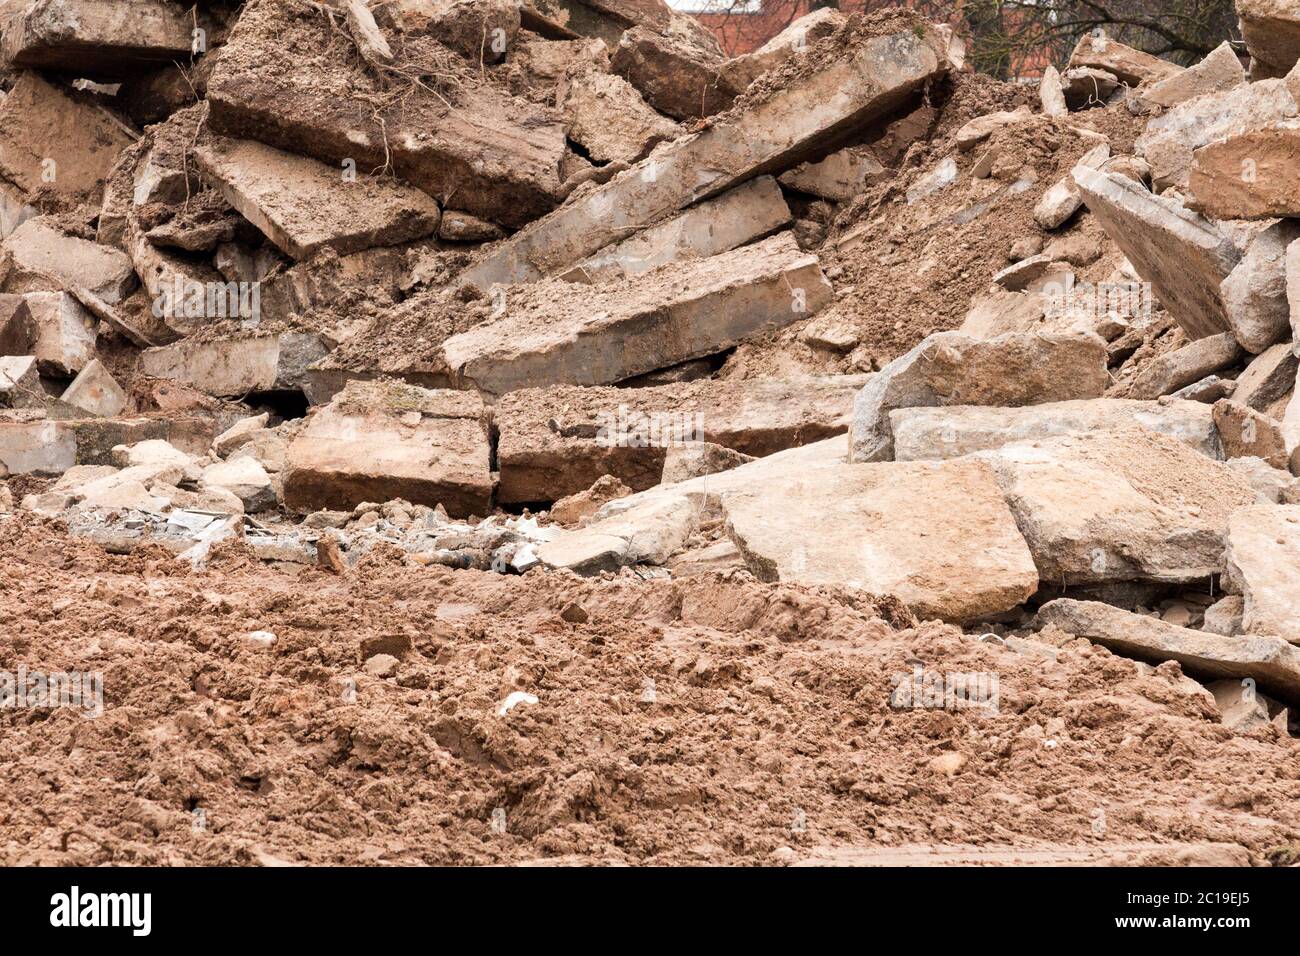 Pile of rubble at a demolition site Stock Photo